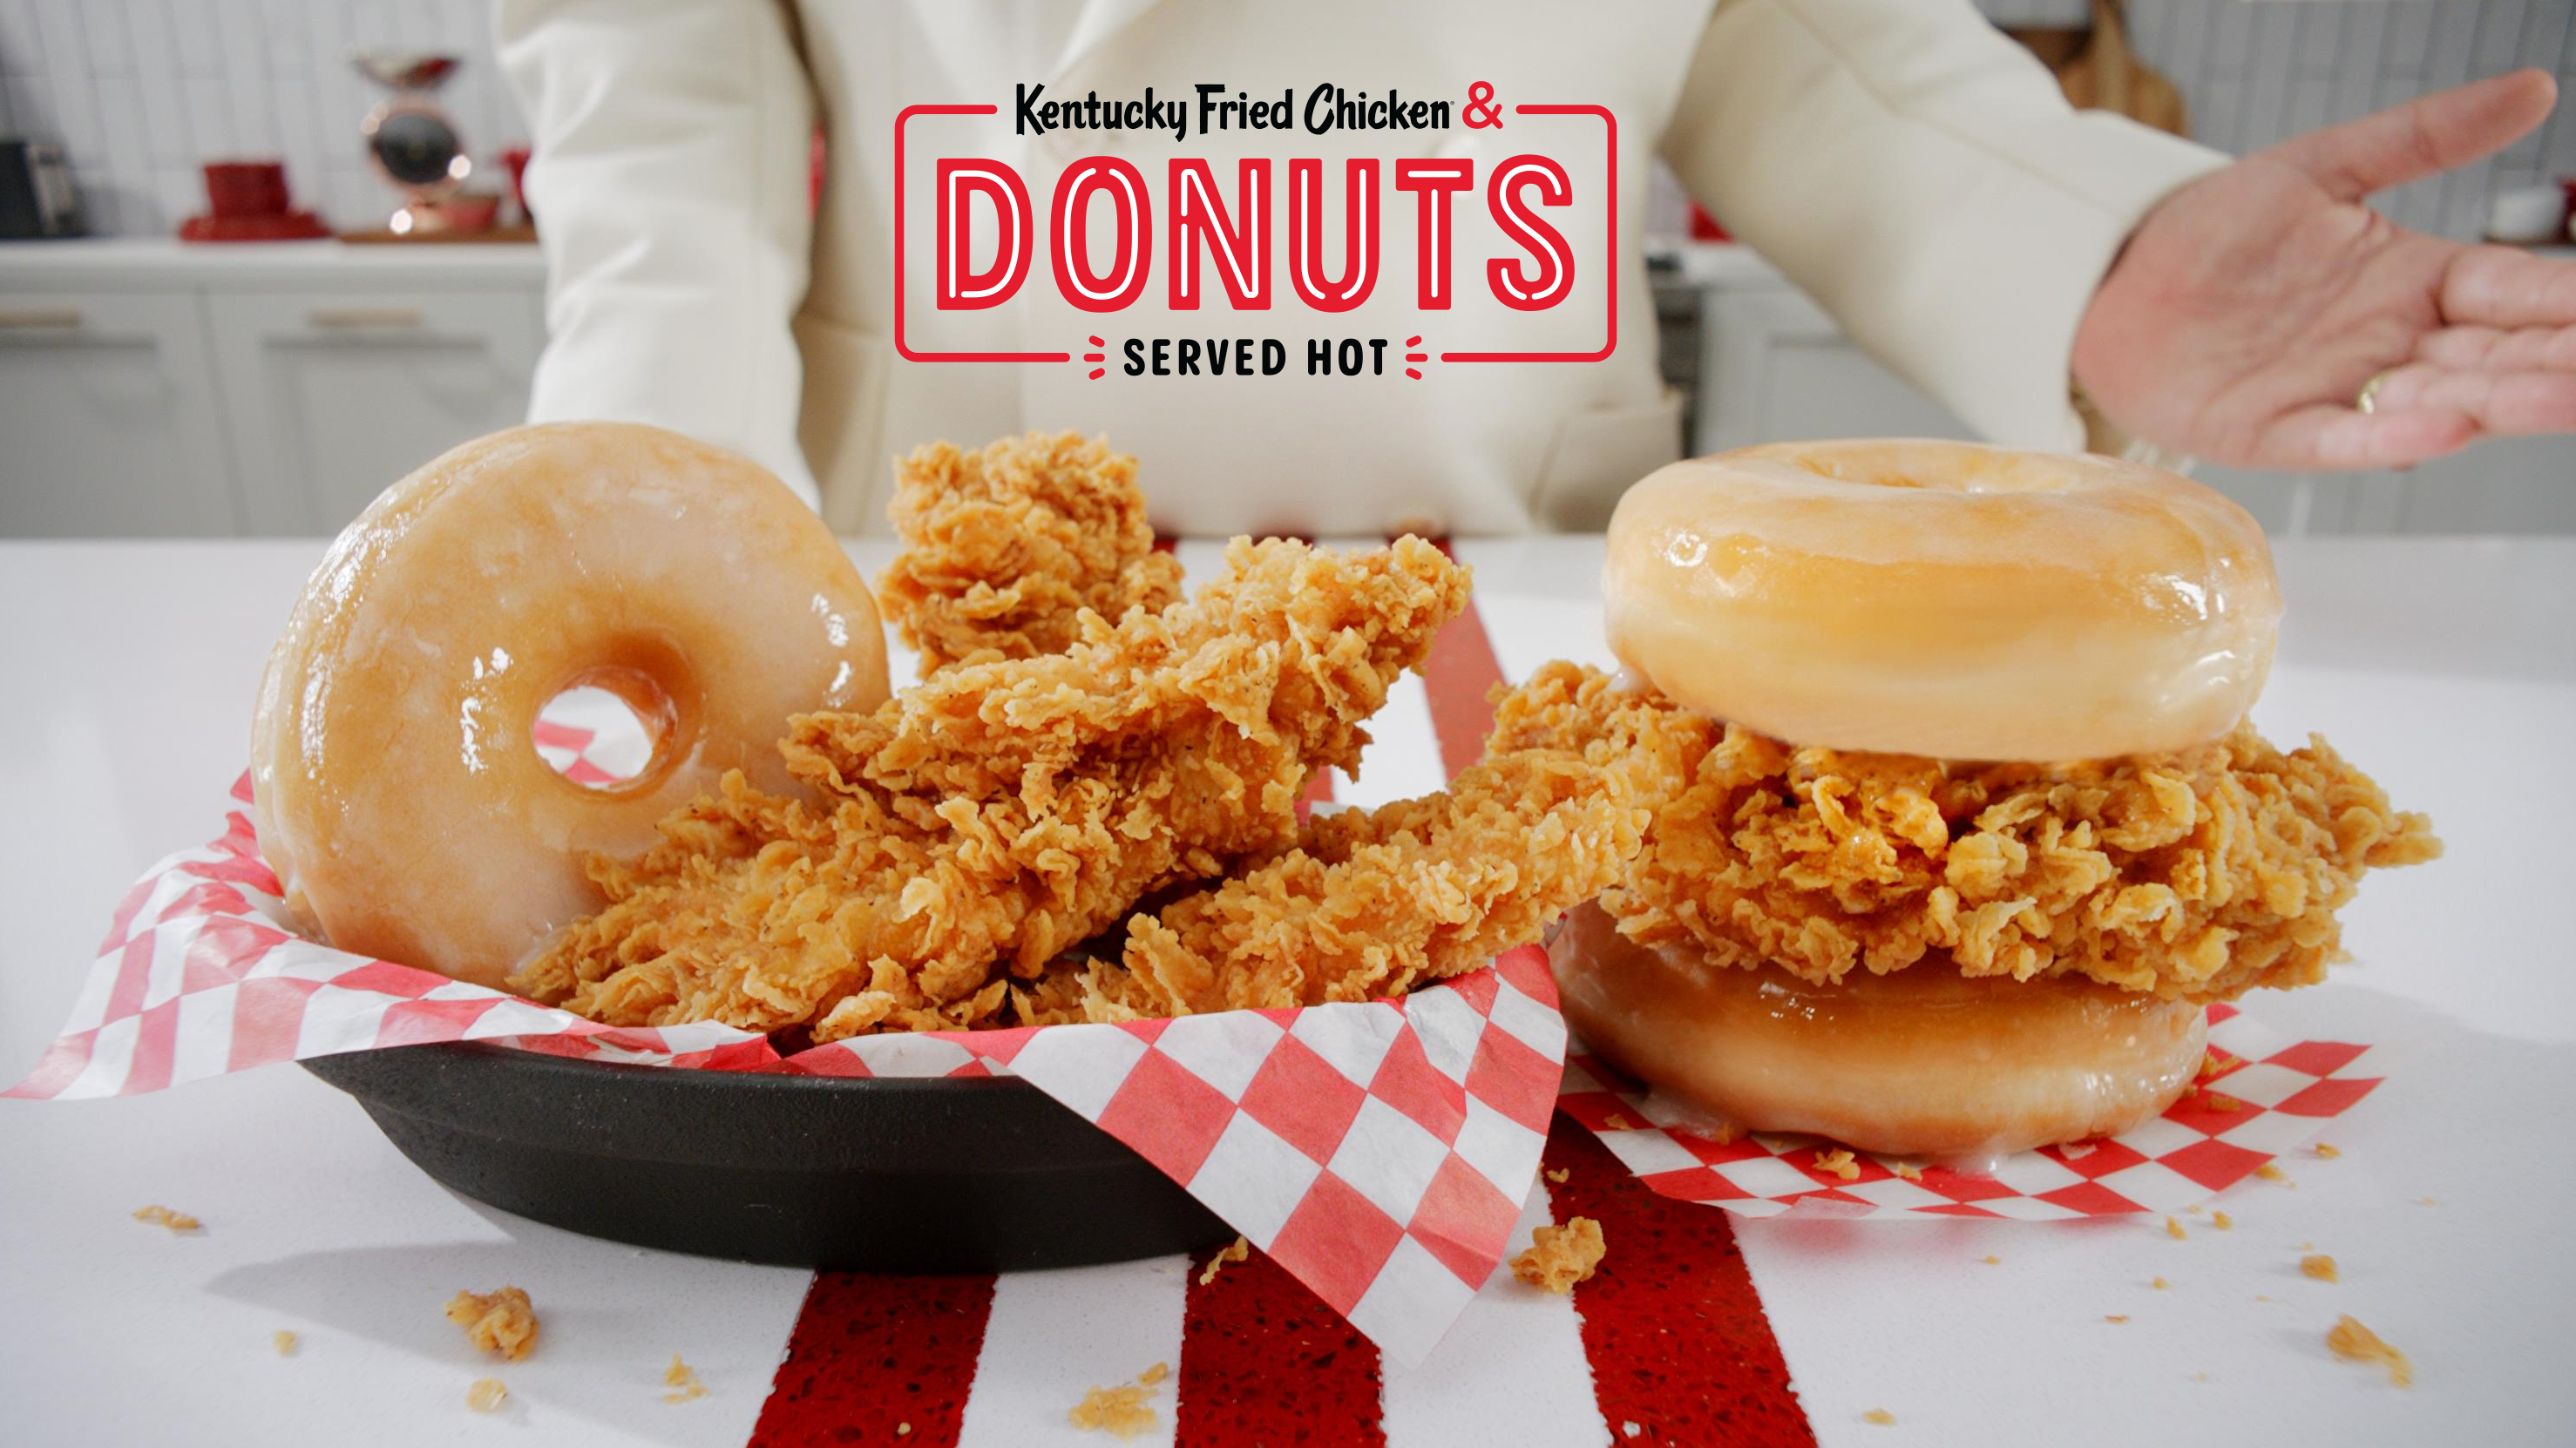 KFC U.S. BRINGS PIPING HOT KENTUCKY FRIED CHICKEN & DONUTS TO ITS  RESTAURANTS NATIONWIDE